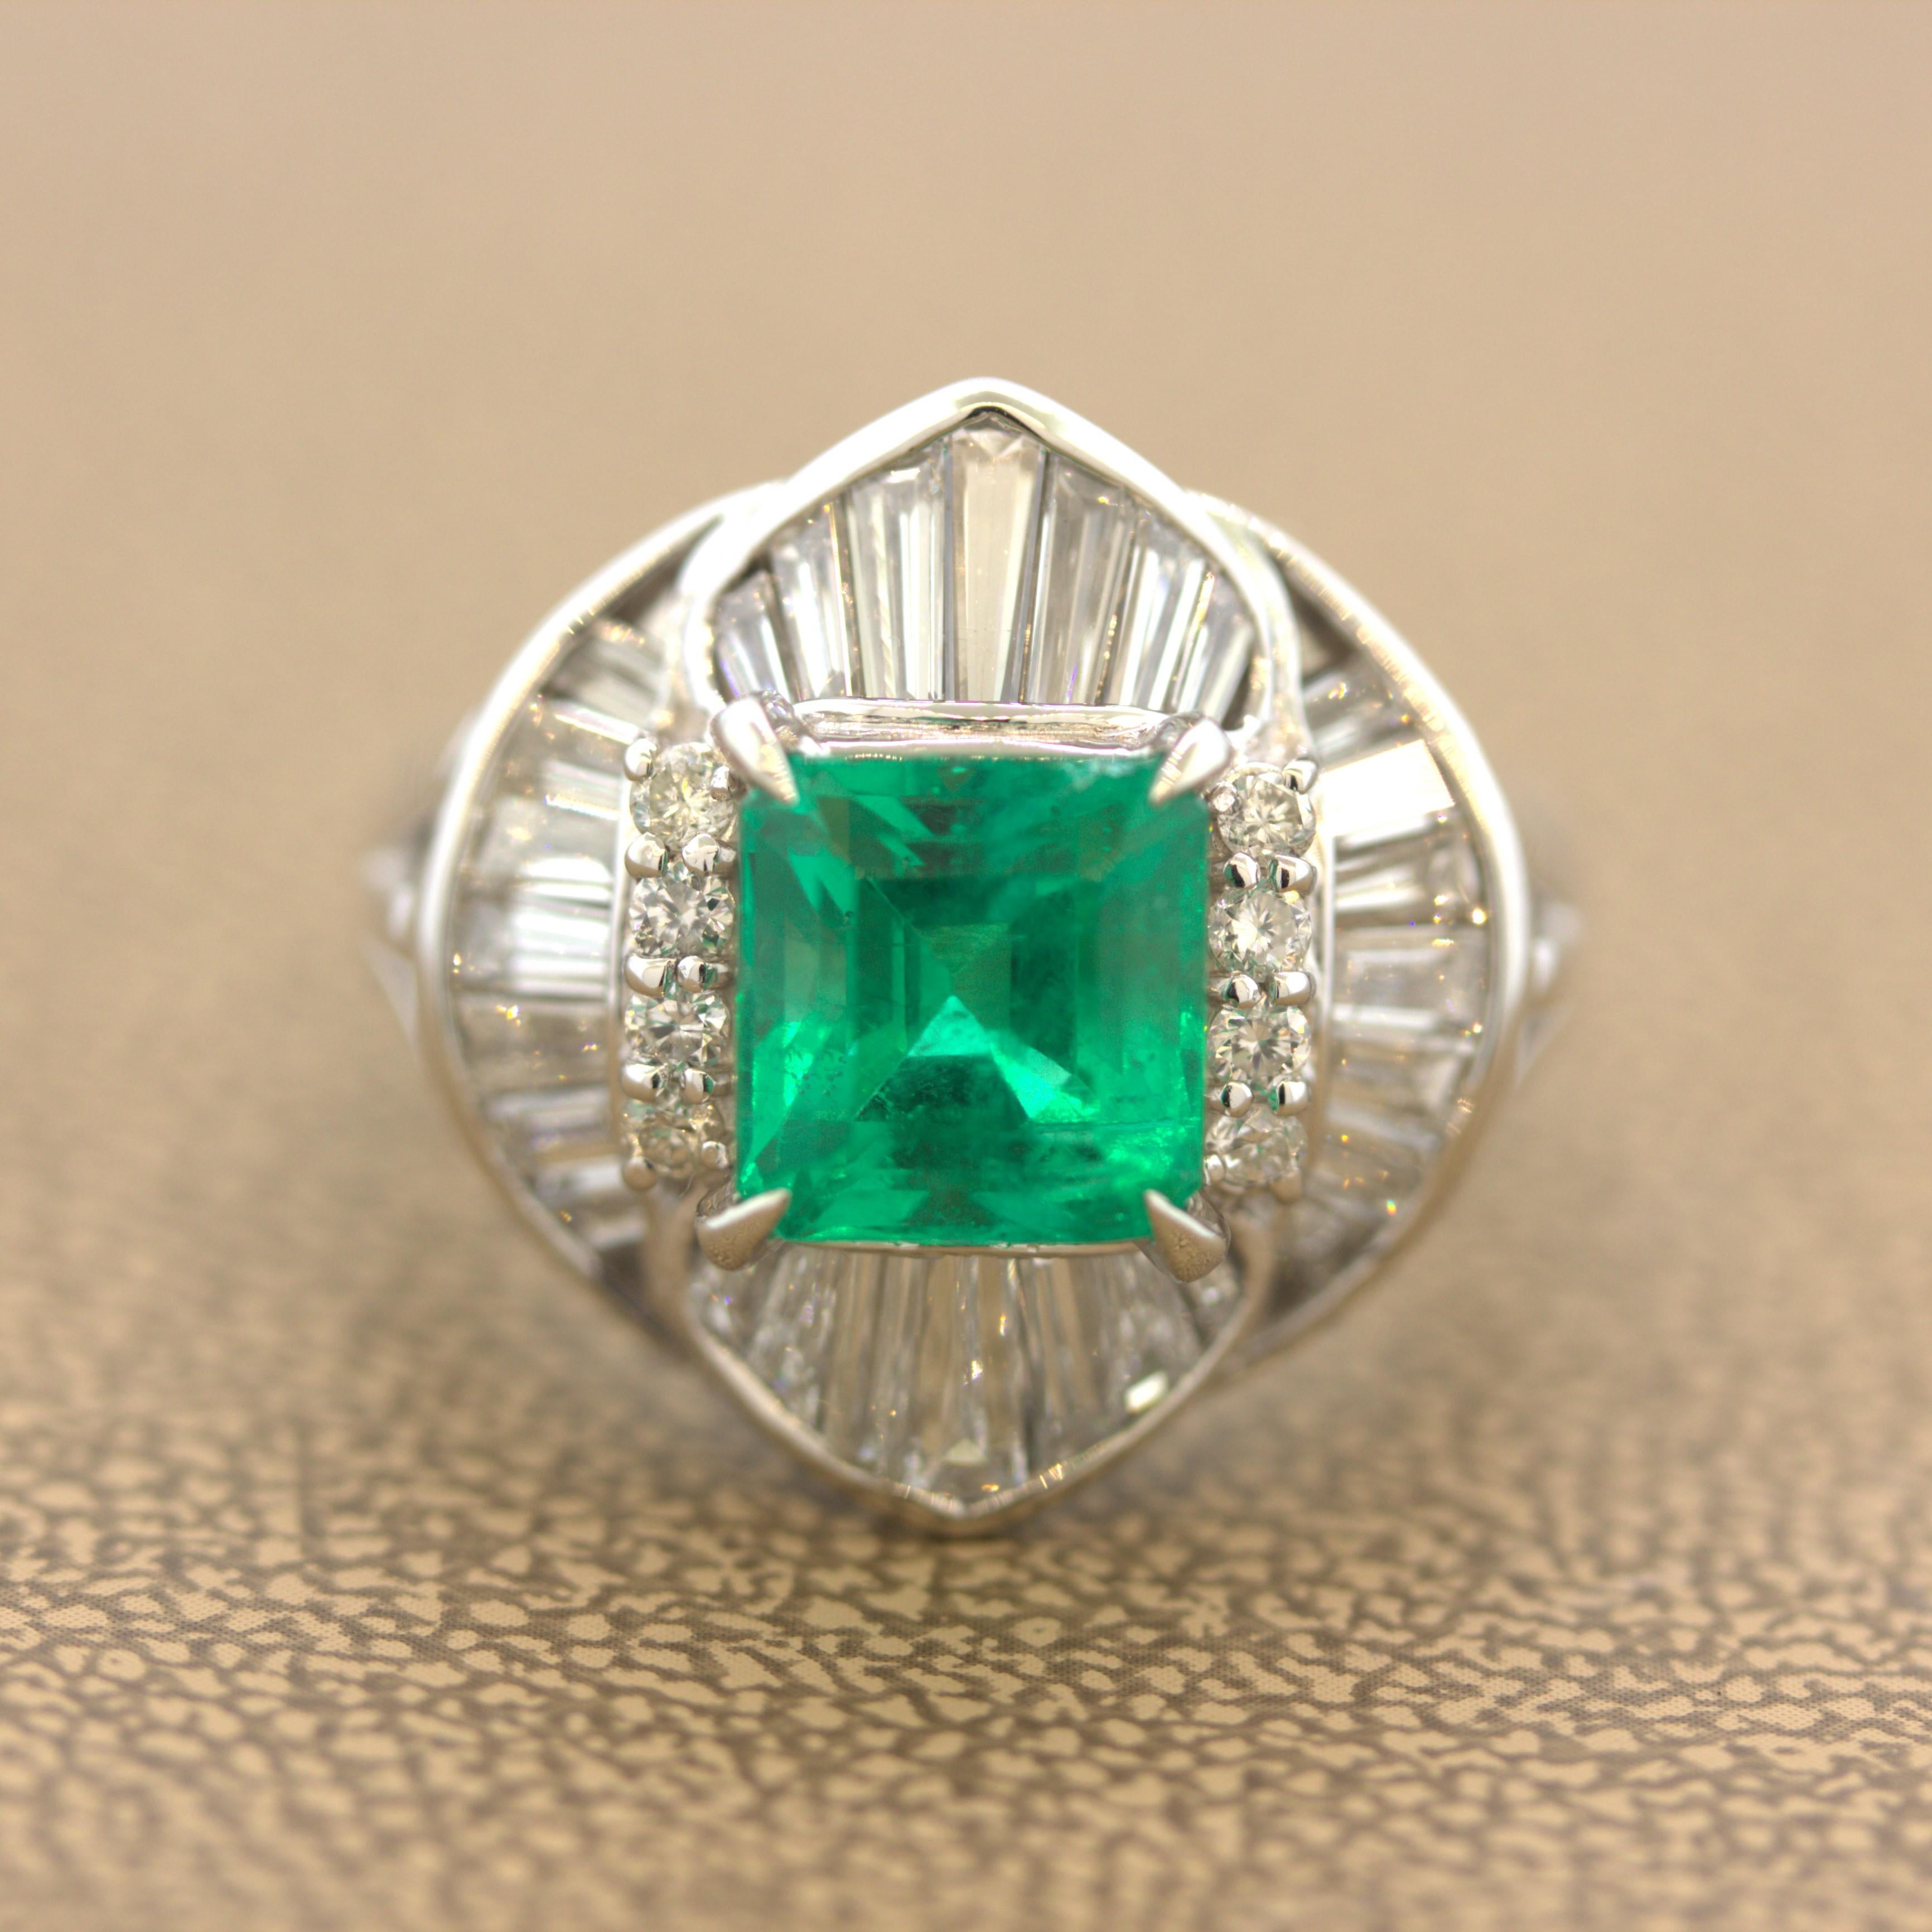 A very fine emerald, most likely from Colombia, takes center stage of this classy platinum diamond ring. It weighs 2.25 carats and has the ideal gemmy green color which made emerald the most famous and popular green gemstone. It has a balanced